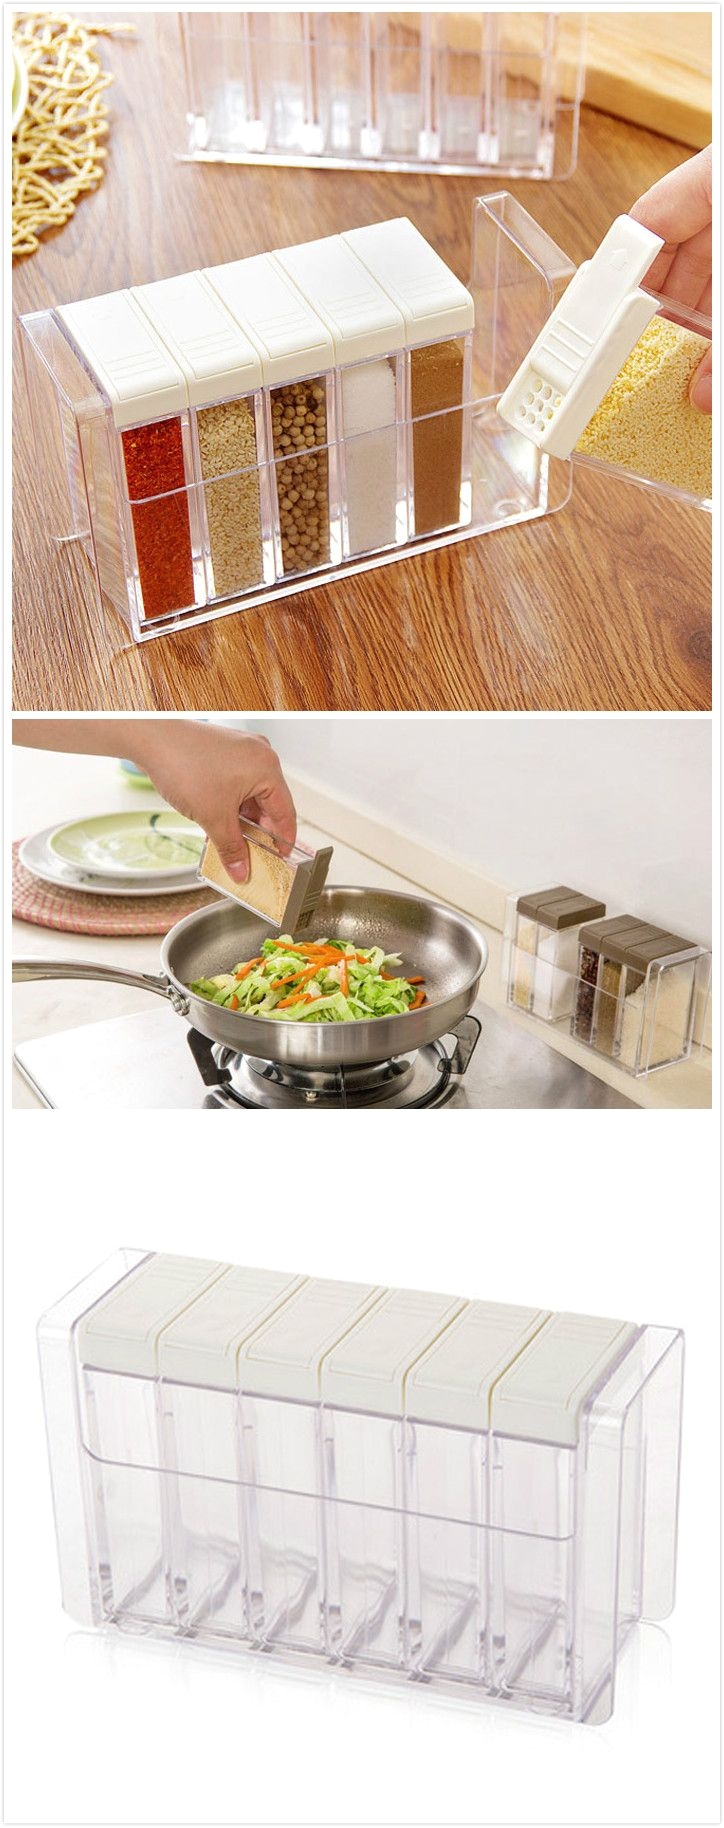 6 sections plastic seasoning box is a perfect kitchen condiment storage helper